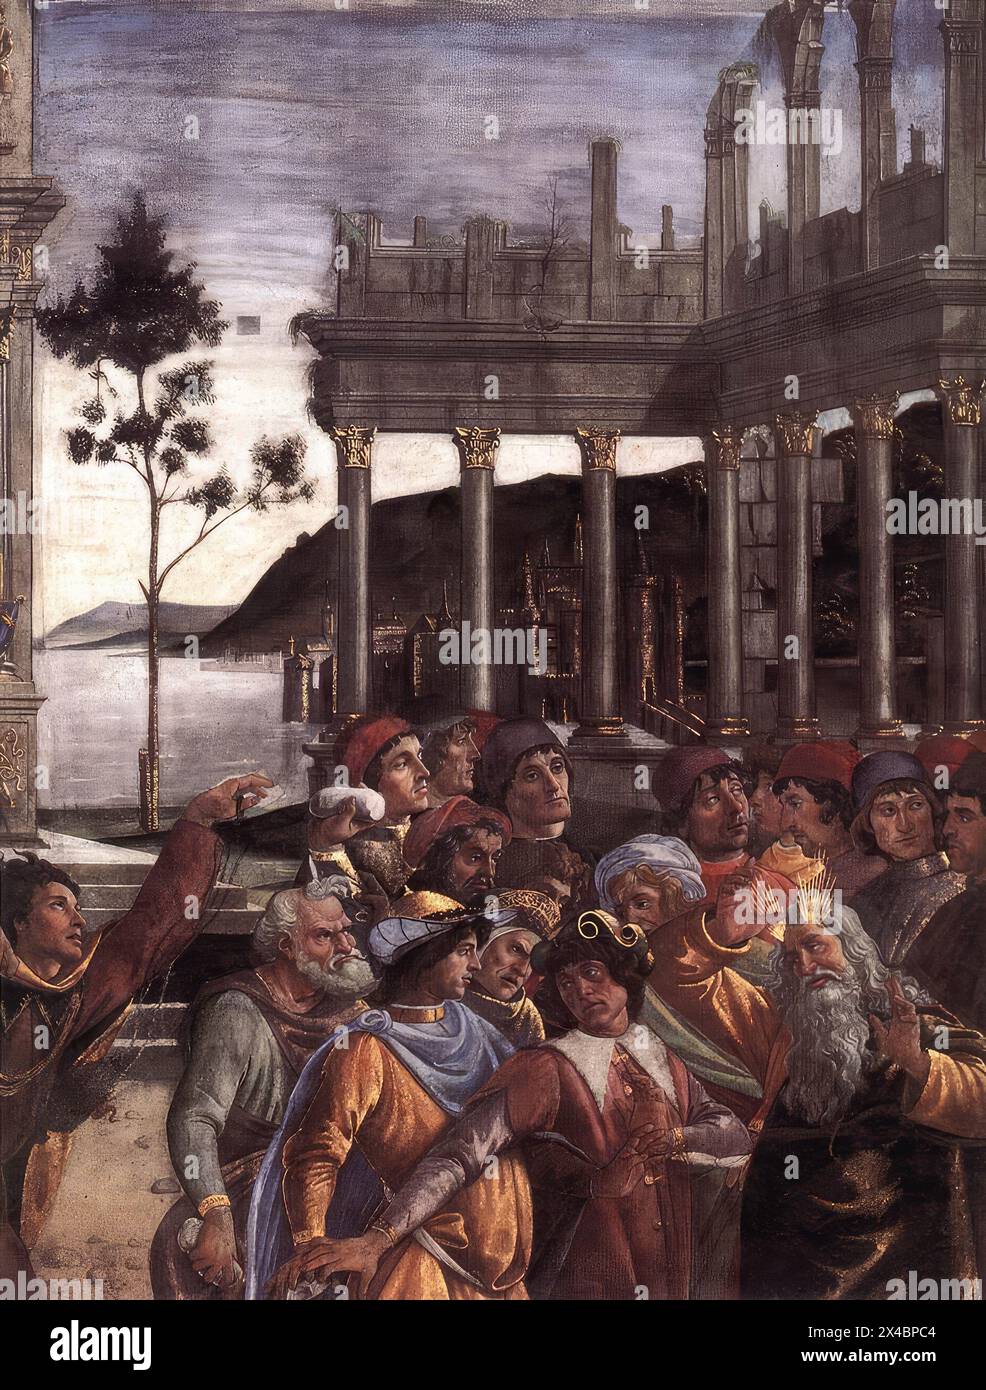 BOTTICELLI, Sandro (b. 1444, Firenze, d. 1510, Firenze)    The Punishment of Korah (detail)  1481-82  Fresco  Cappella Sistina, Vatican    On the right-hand side of the fresco, the revolt of the Jews against Moses is related, the latter portrayed as an old man with a long white beard, clothed in a yellow robe and an olive-green cloak. Irritated by the various trials through which their emigration from Egypt was putting them, the Jews demanded that Moses be dismissed. They wanted a new leader, one who would take them back to Egypt, and they threatened to stone Moses; however, Joshua placed hims Stock Photo